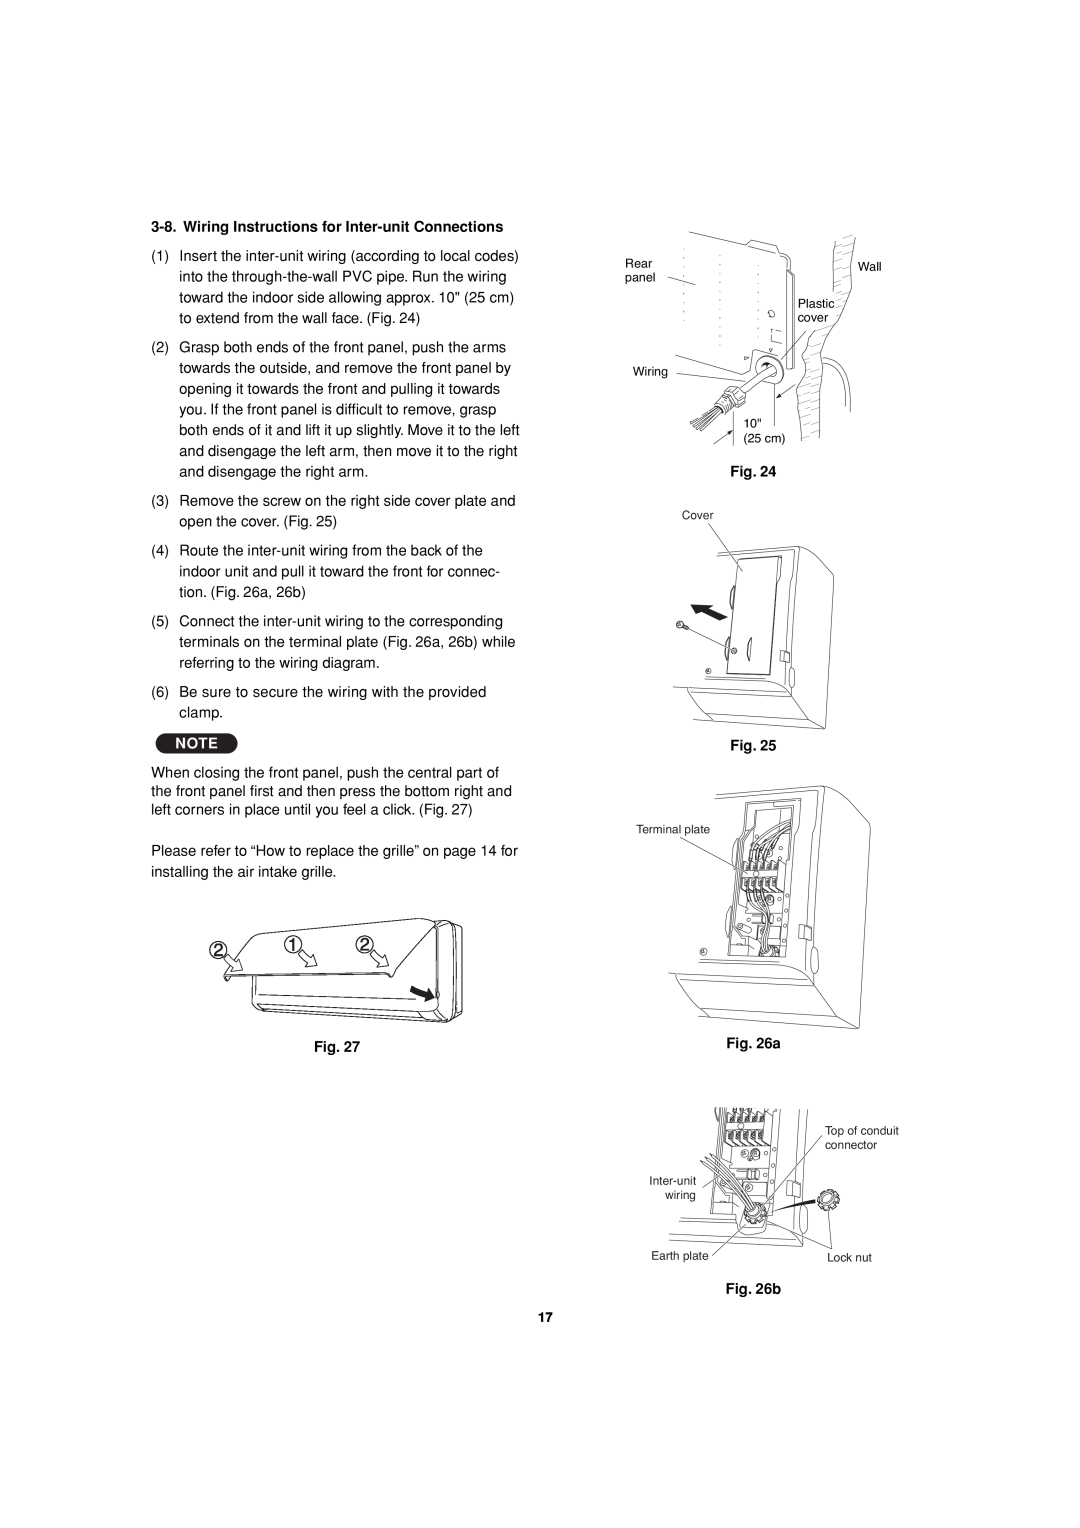 Sanyo C3682, C3082 service manual Wiring Instructions for Inter-unit Connections, b 